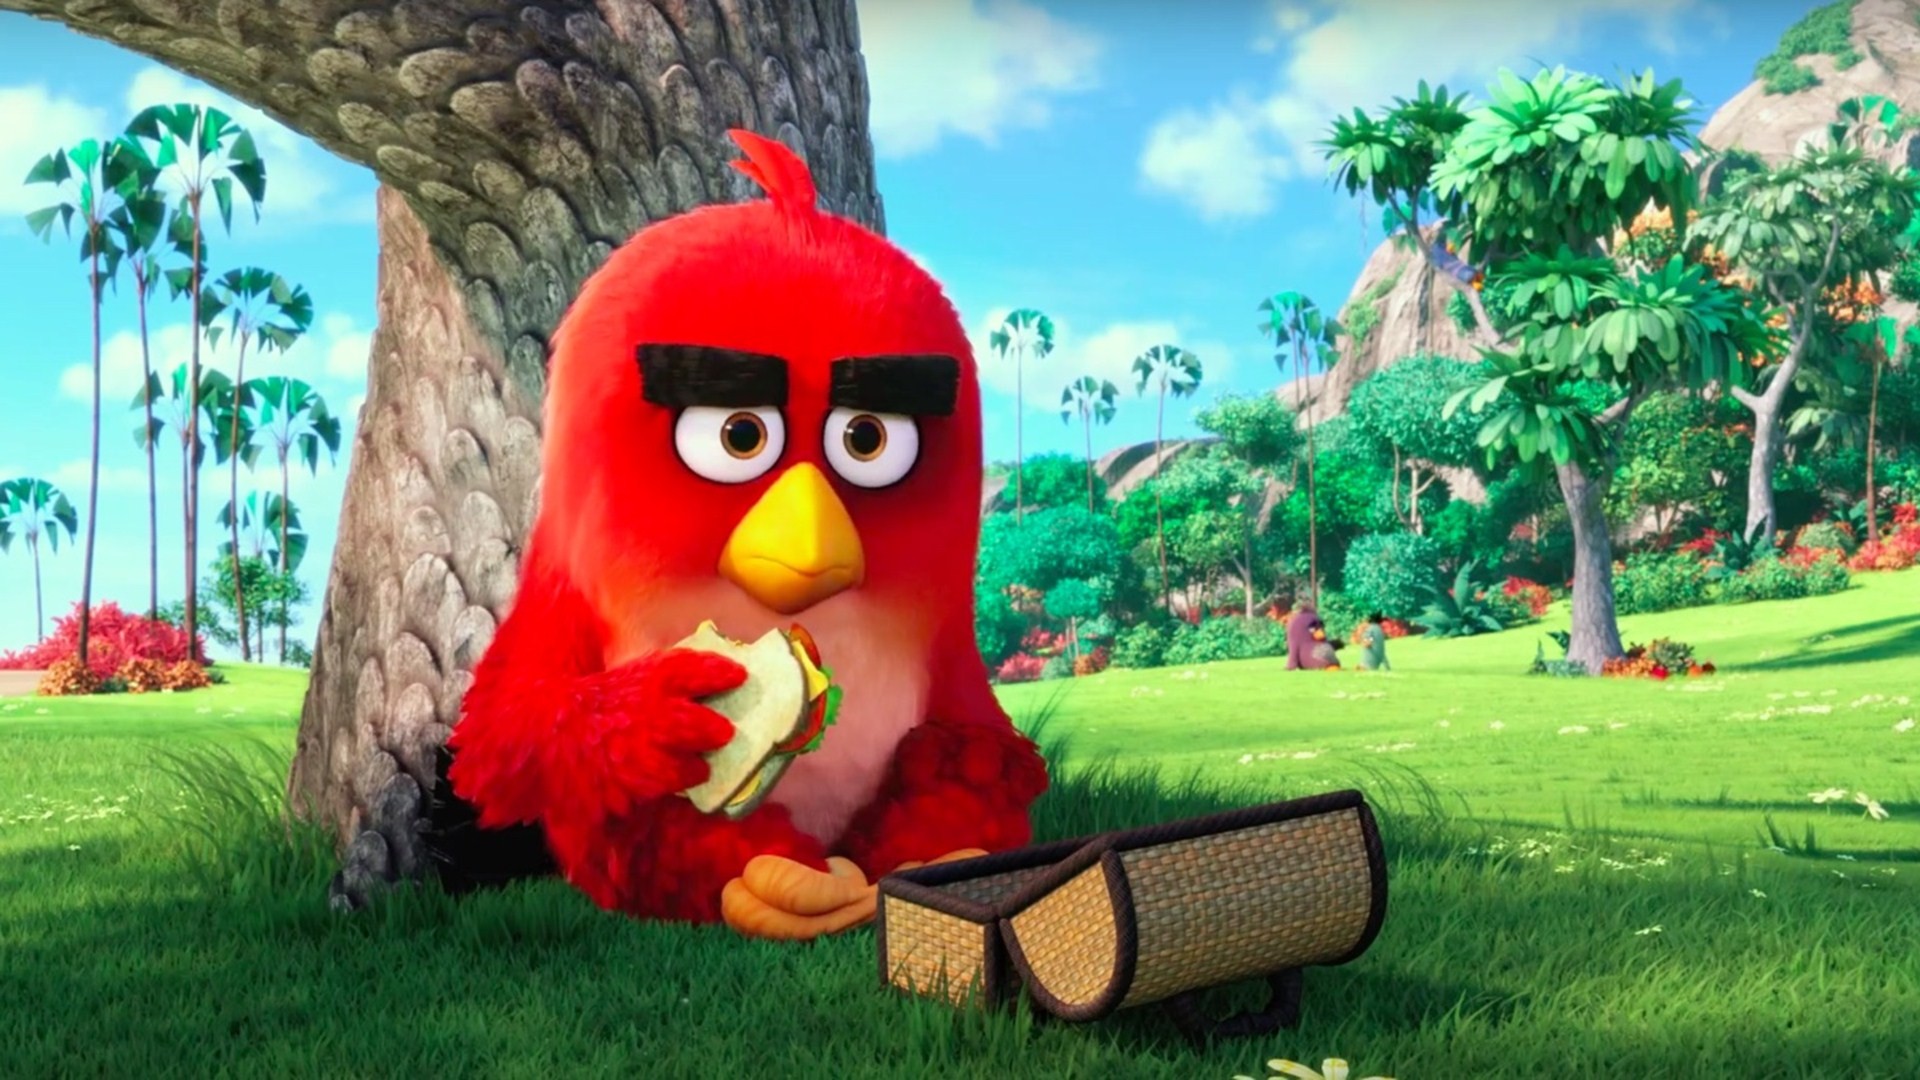 Angry Birds Wallpaper Android - Hd Wallpapers Angry Birds - HD Wallpaper 